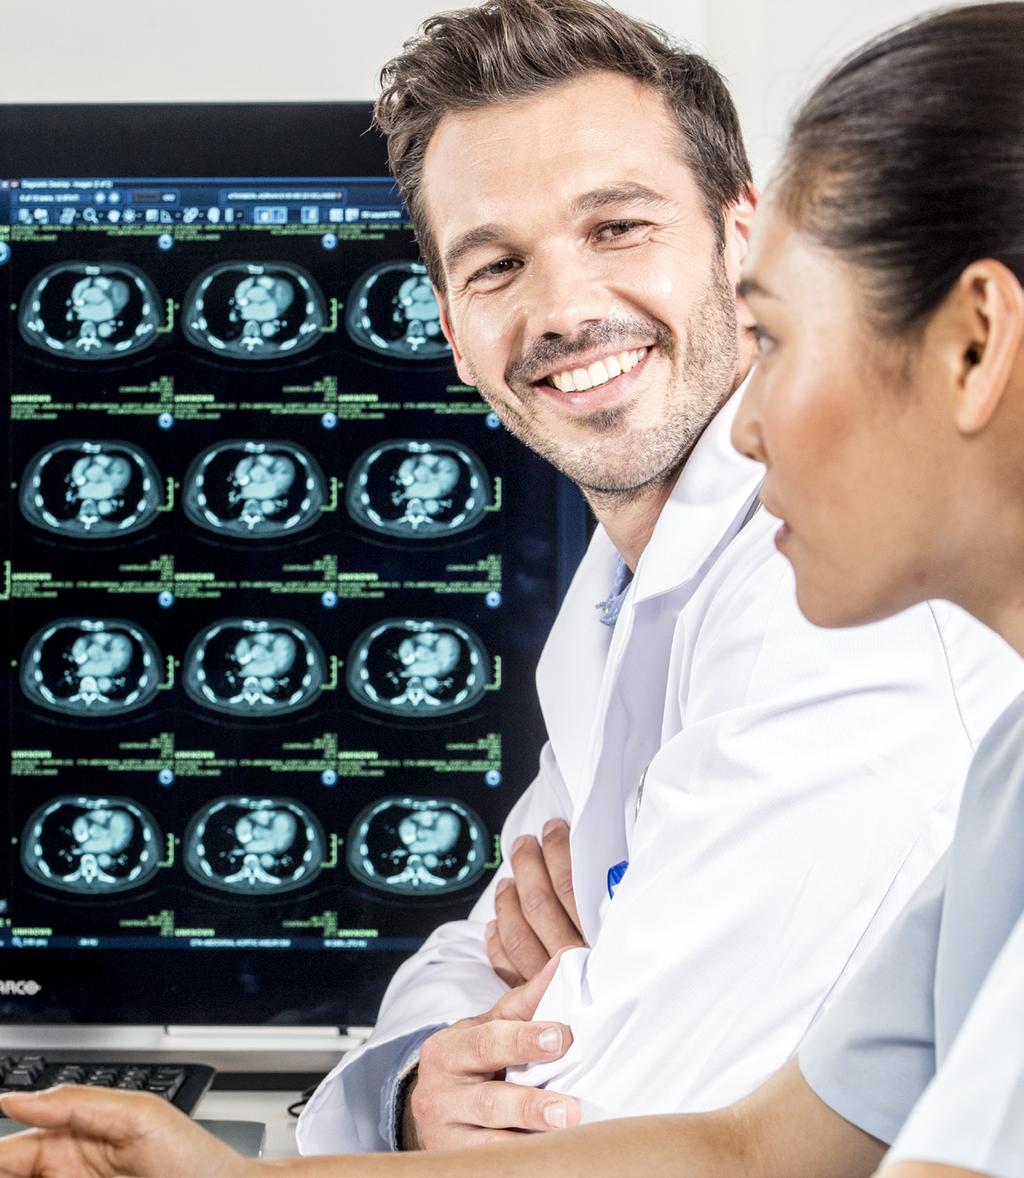 How Agfa HealthCare can help 1 A single platform for faster, meaningful images The Enterprise Imaging for Radiology platform offers a centralized imaging administration and exam set-up.